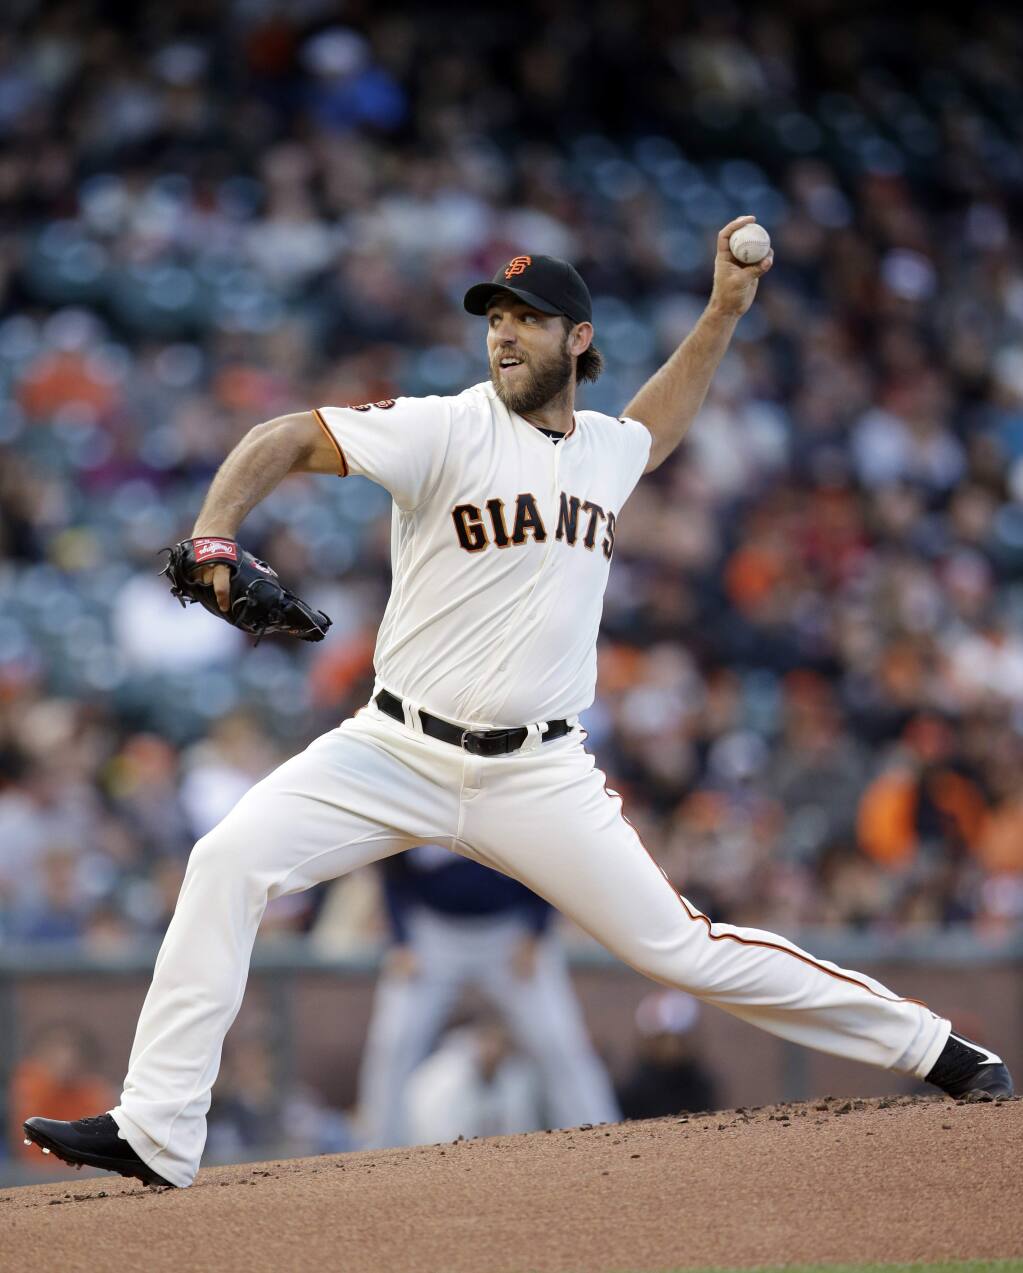 Giants' Madison Bumgarner beats Brewers for 7th win in row